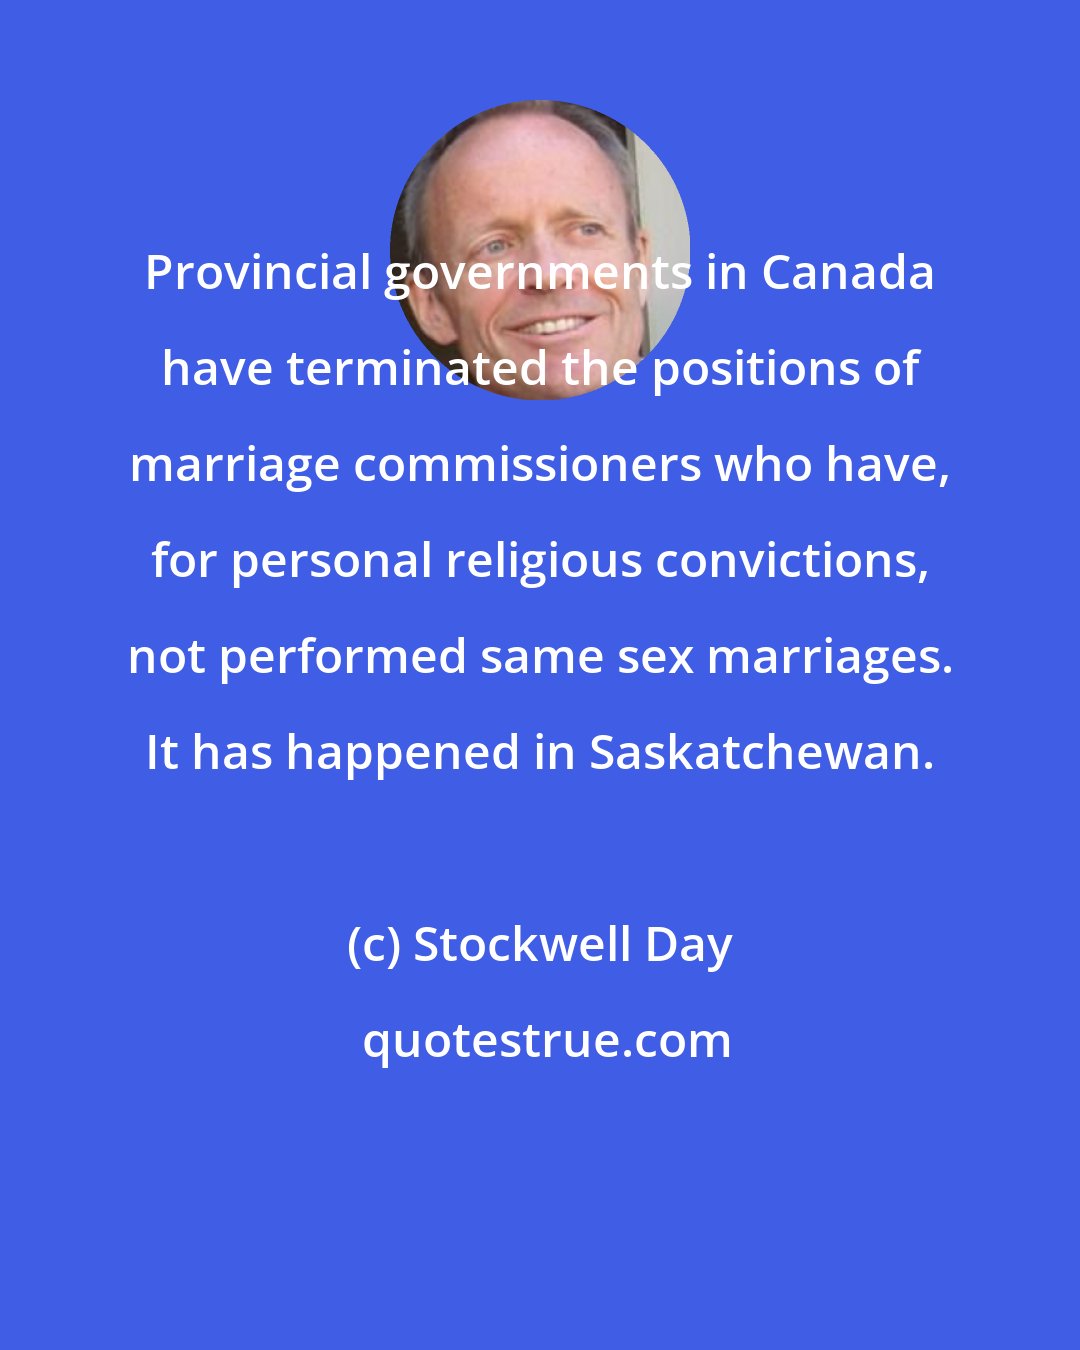 Stockwell Day: Provincial governments in Canada have terminated the positions of marriage commissioners who have, for personal religious convictions, not performed same sex marriages. It has happened in Saskatchewan.